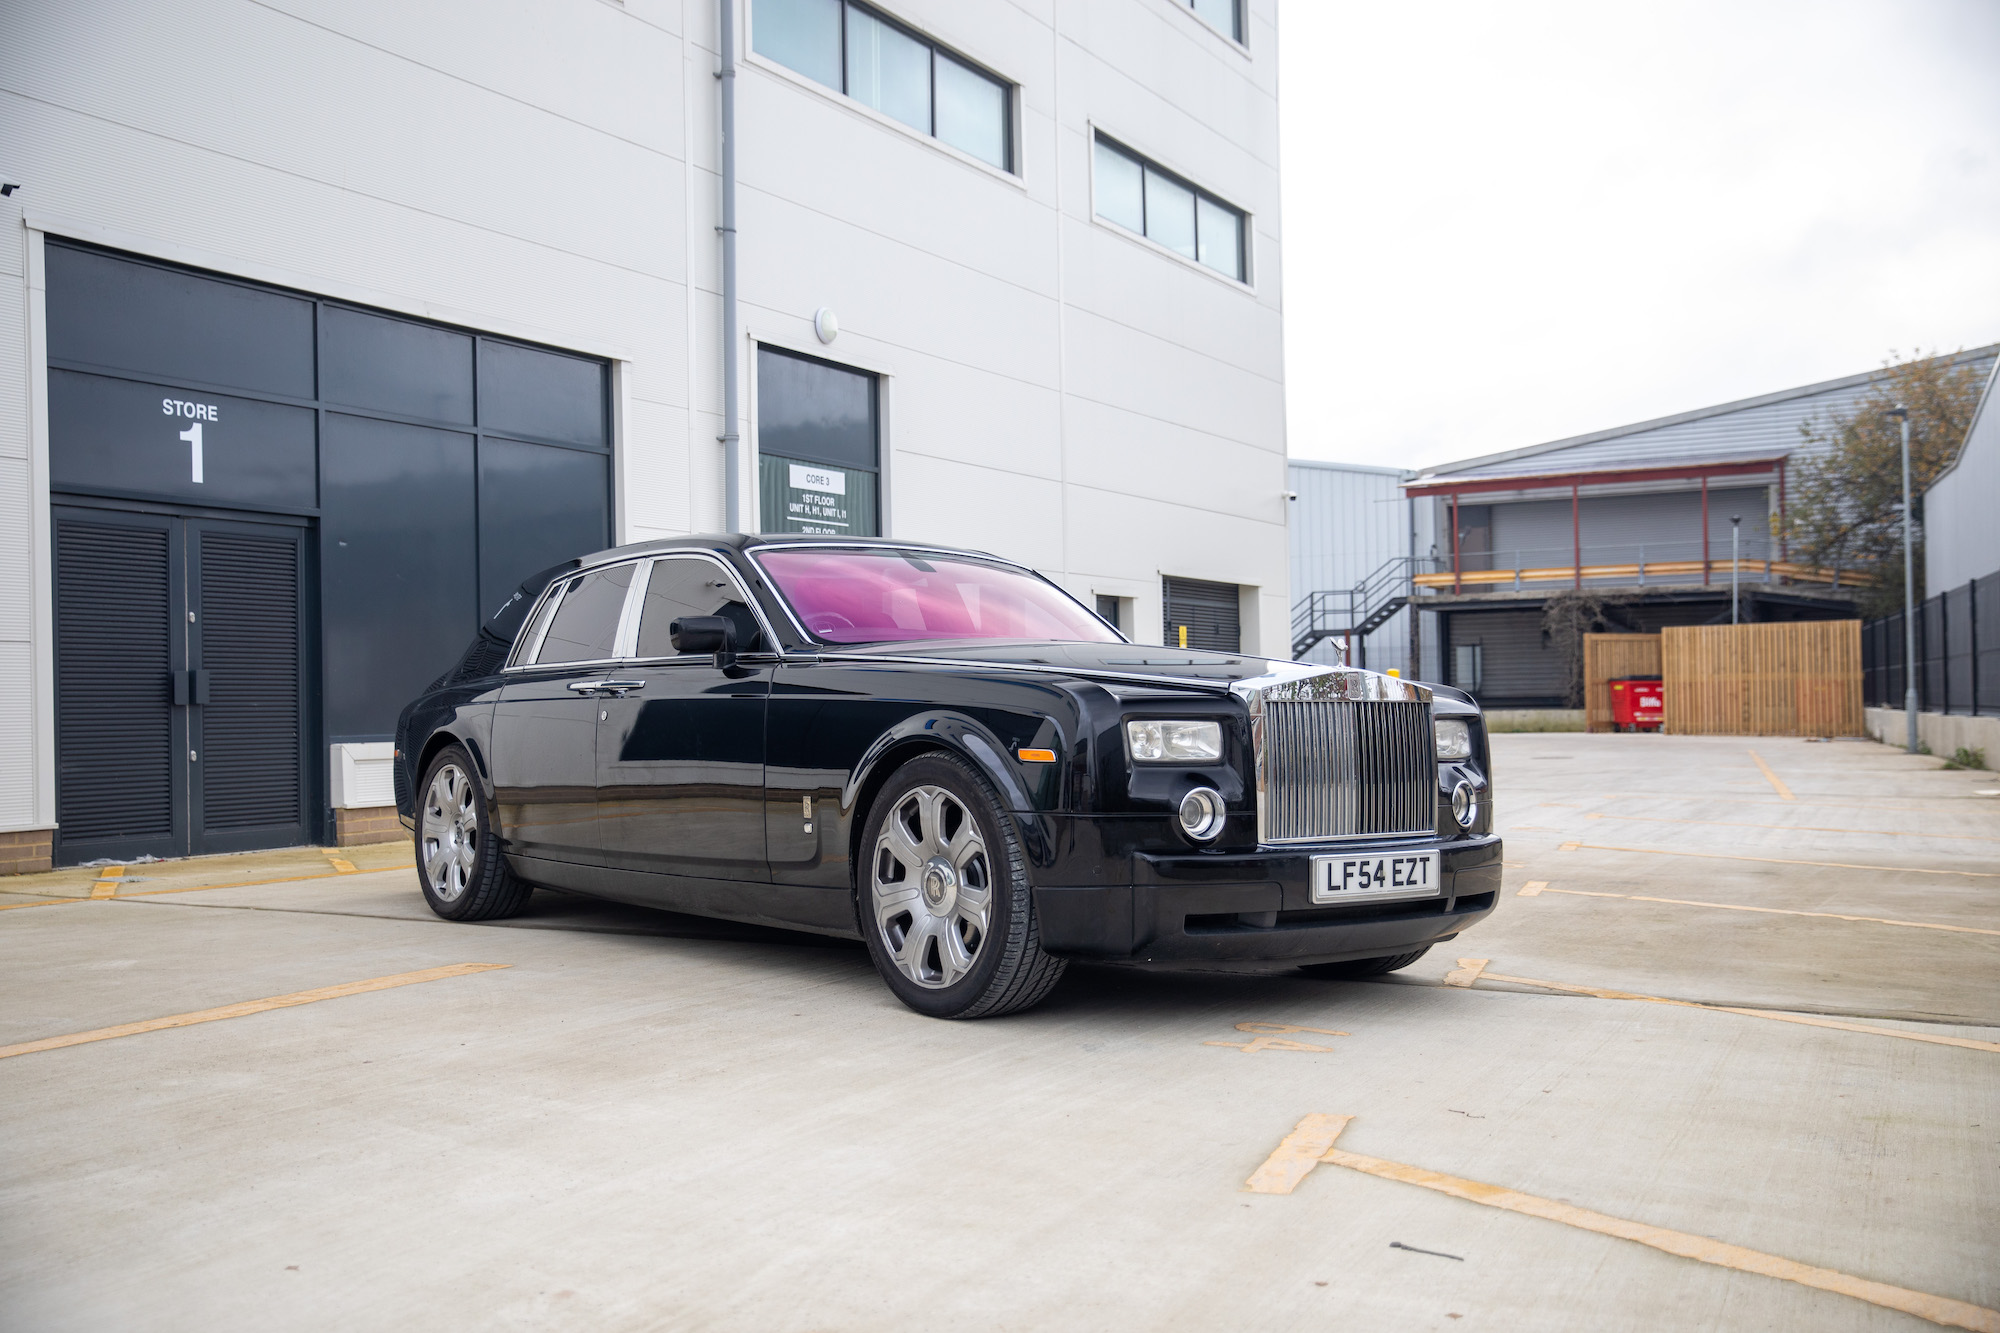 RollsRoyce Phantom Problems  Reliability Issues  CarsGuide